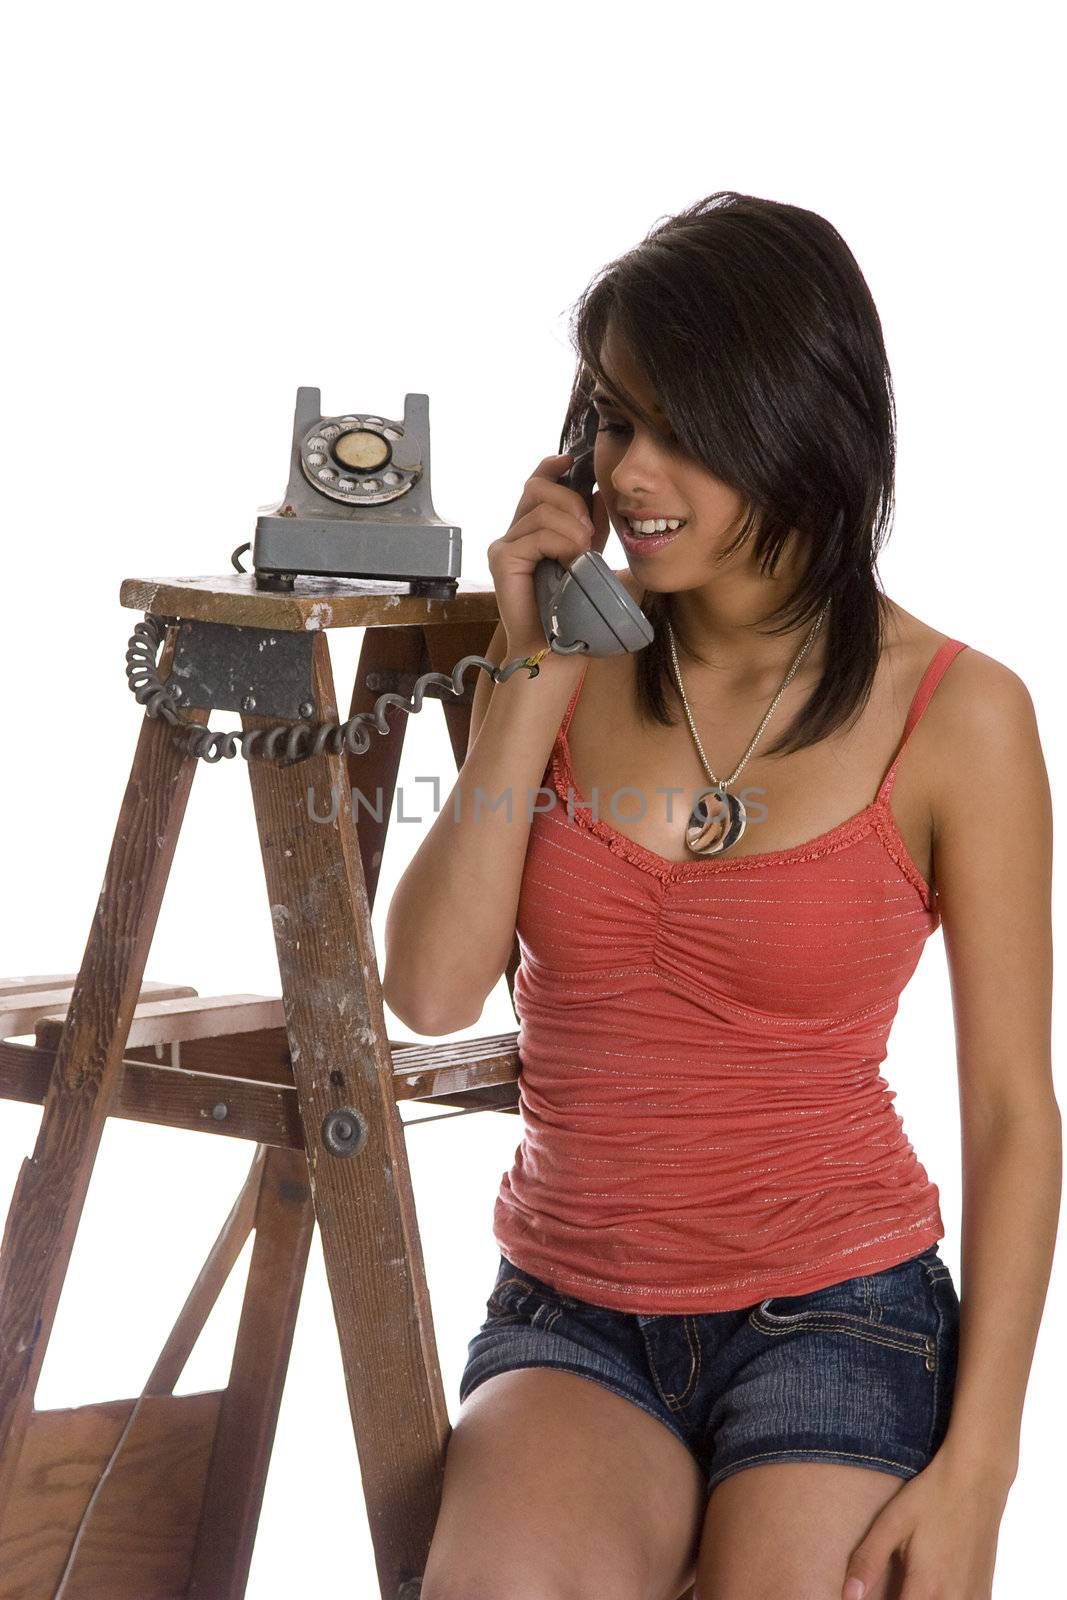 teenage girl standing on ladder talking on a old rotary phone